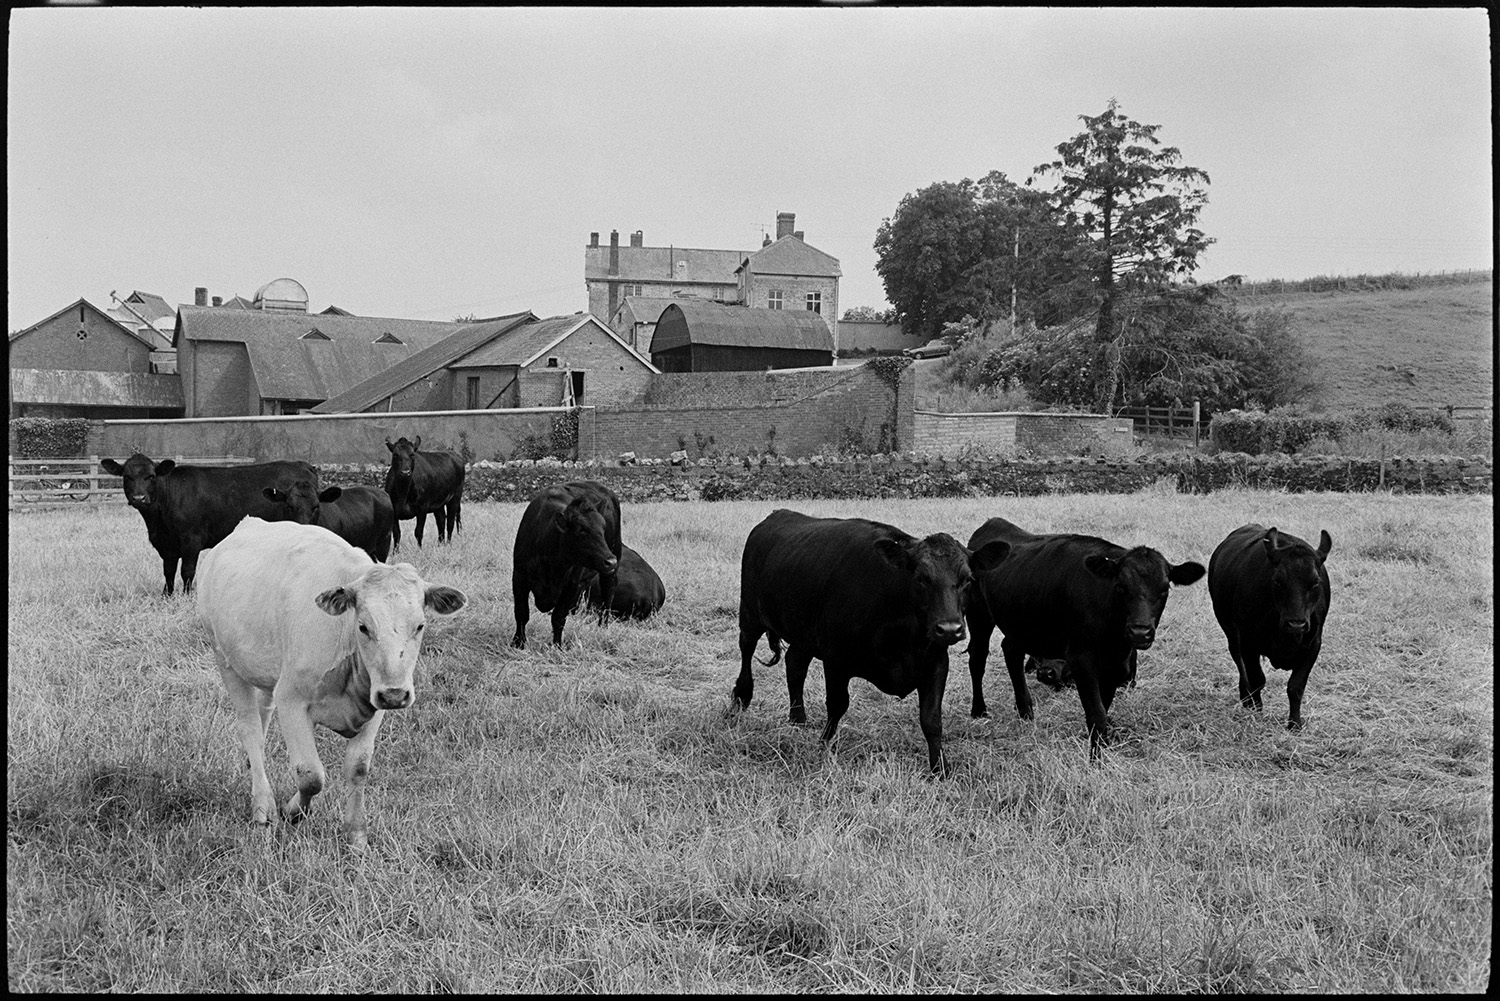 Cows in field. 
[Cows in a field in front of barns and farm buildings at Copplestone.]